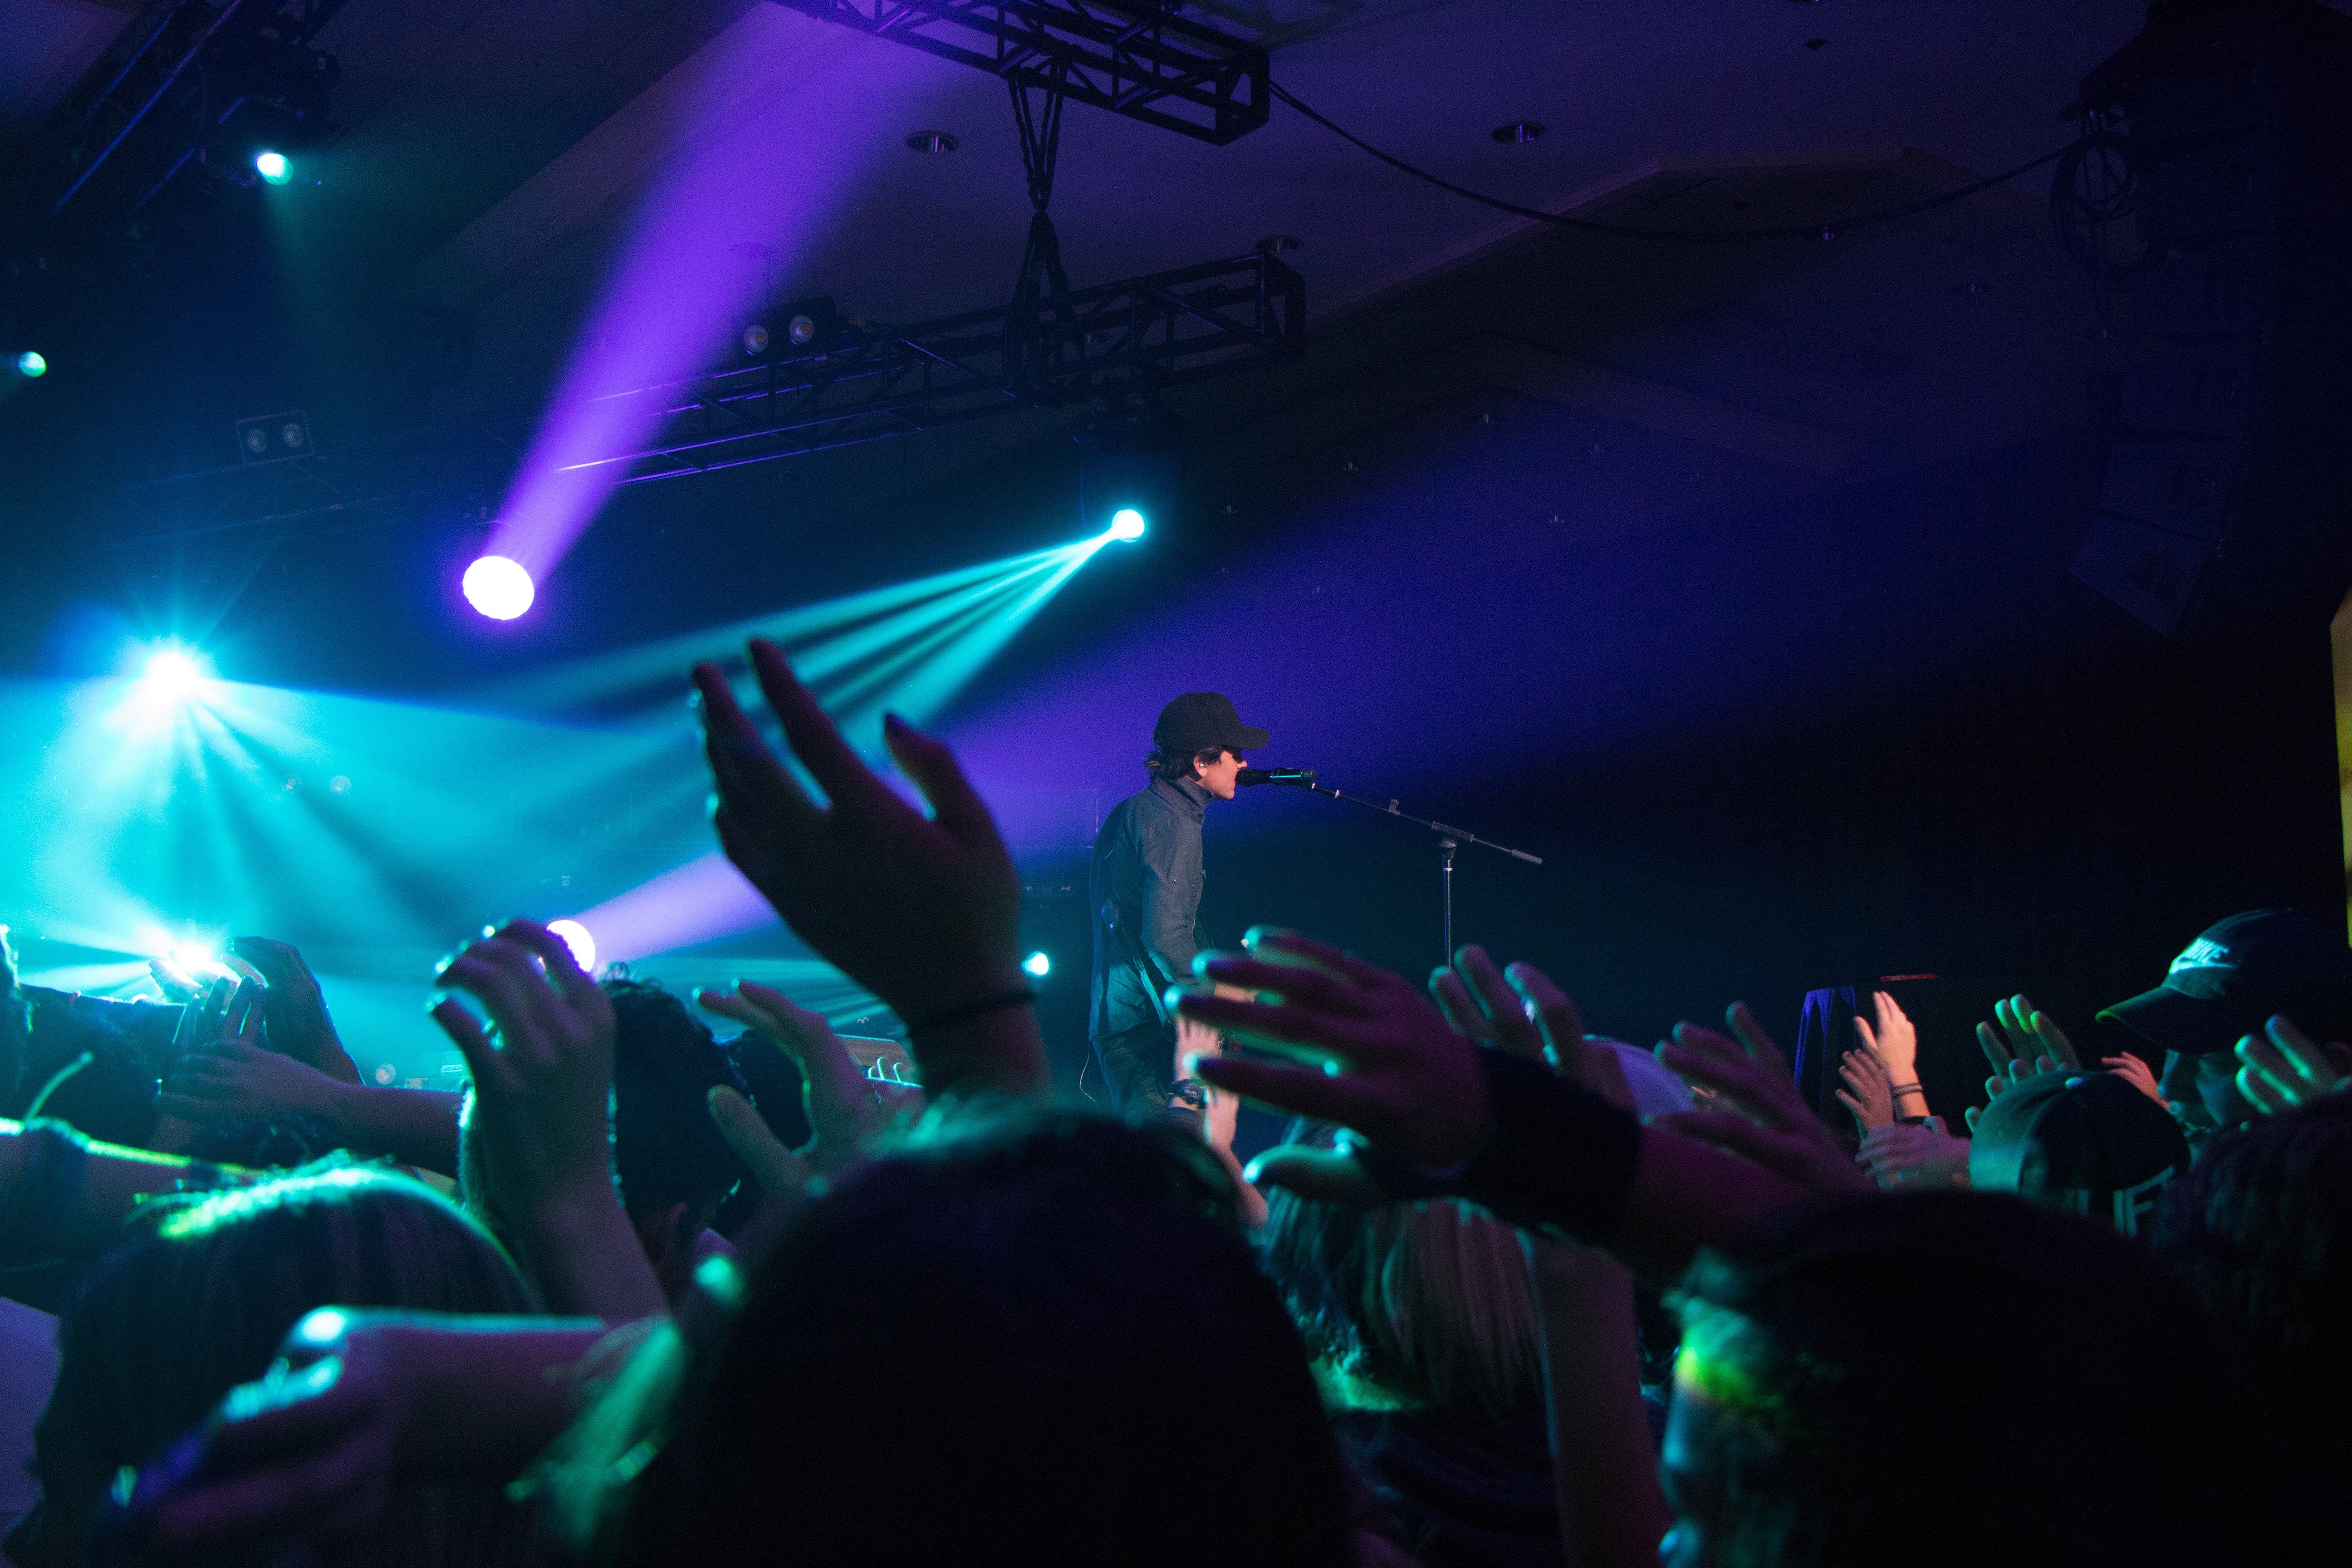 Man singing on stage with stage lights near crowd photo